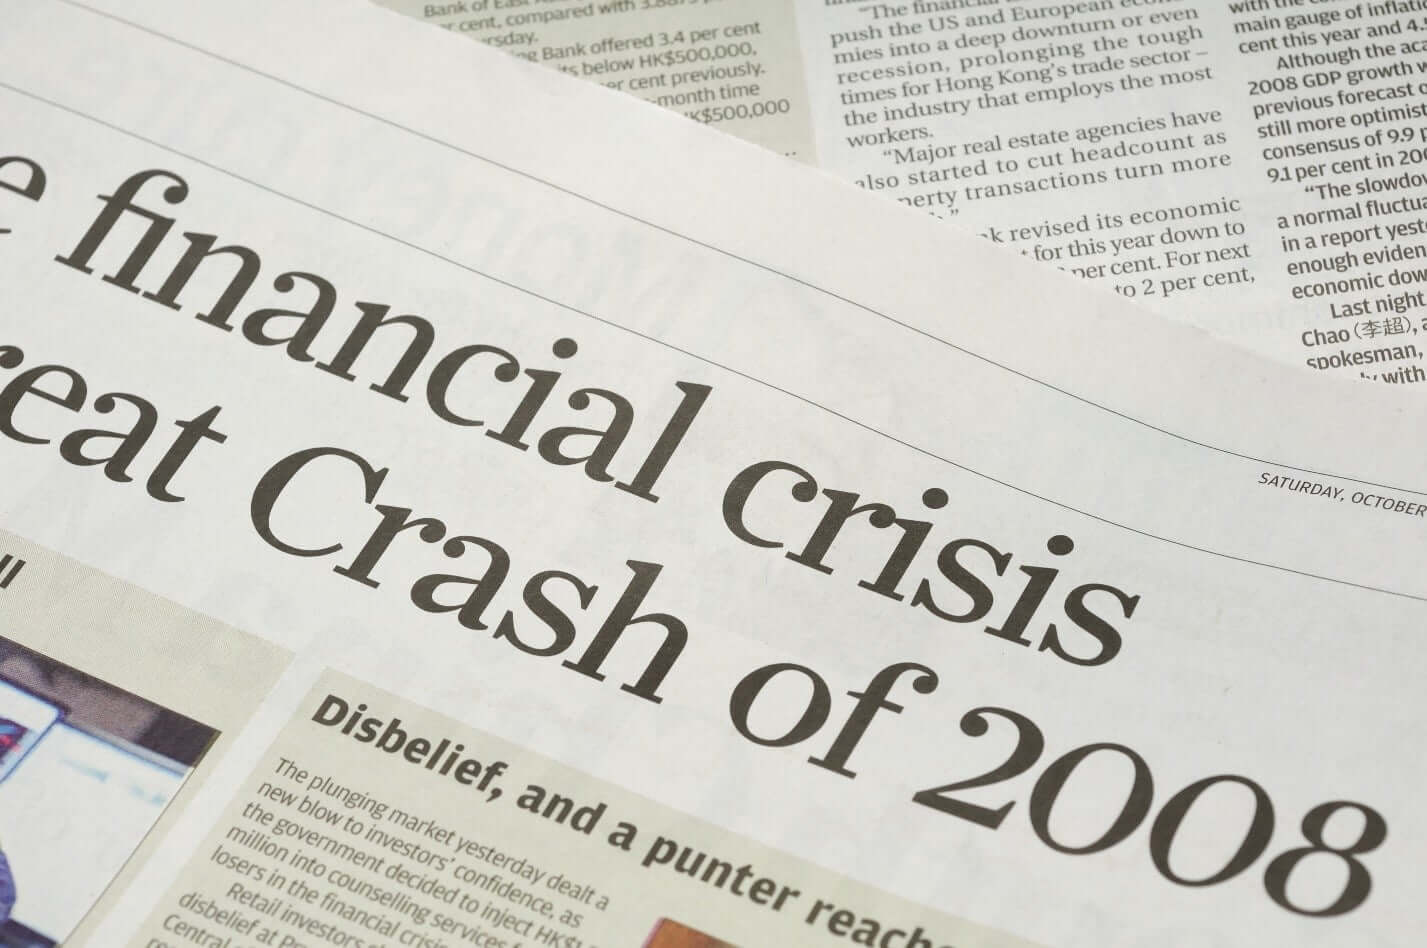 newspaper clip showing financial crisis of 2008 and home rental market